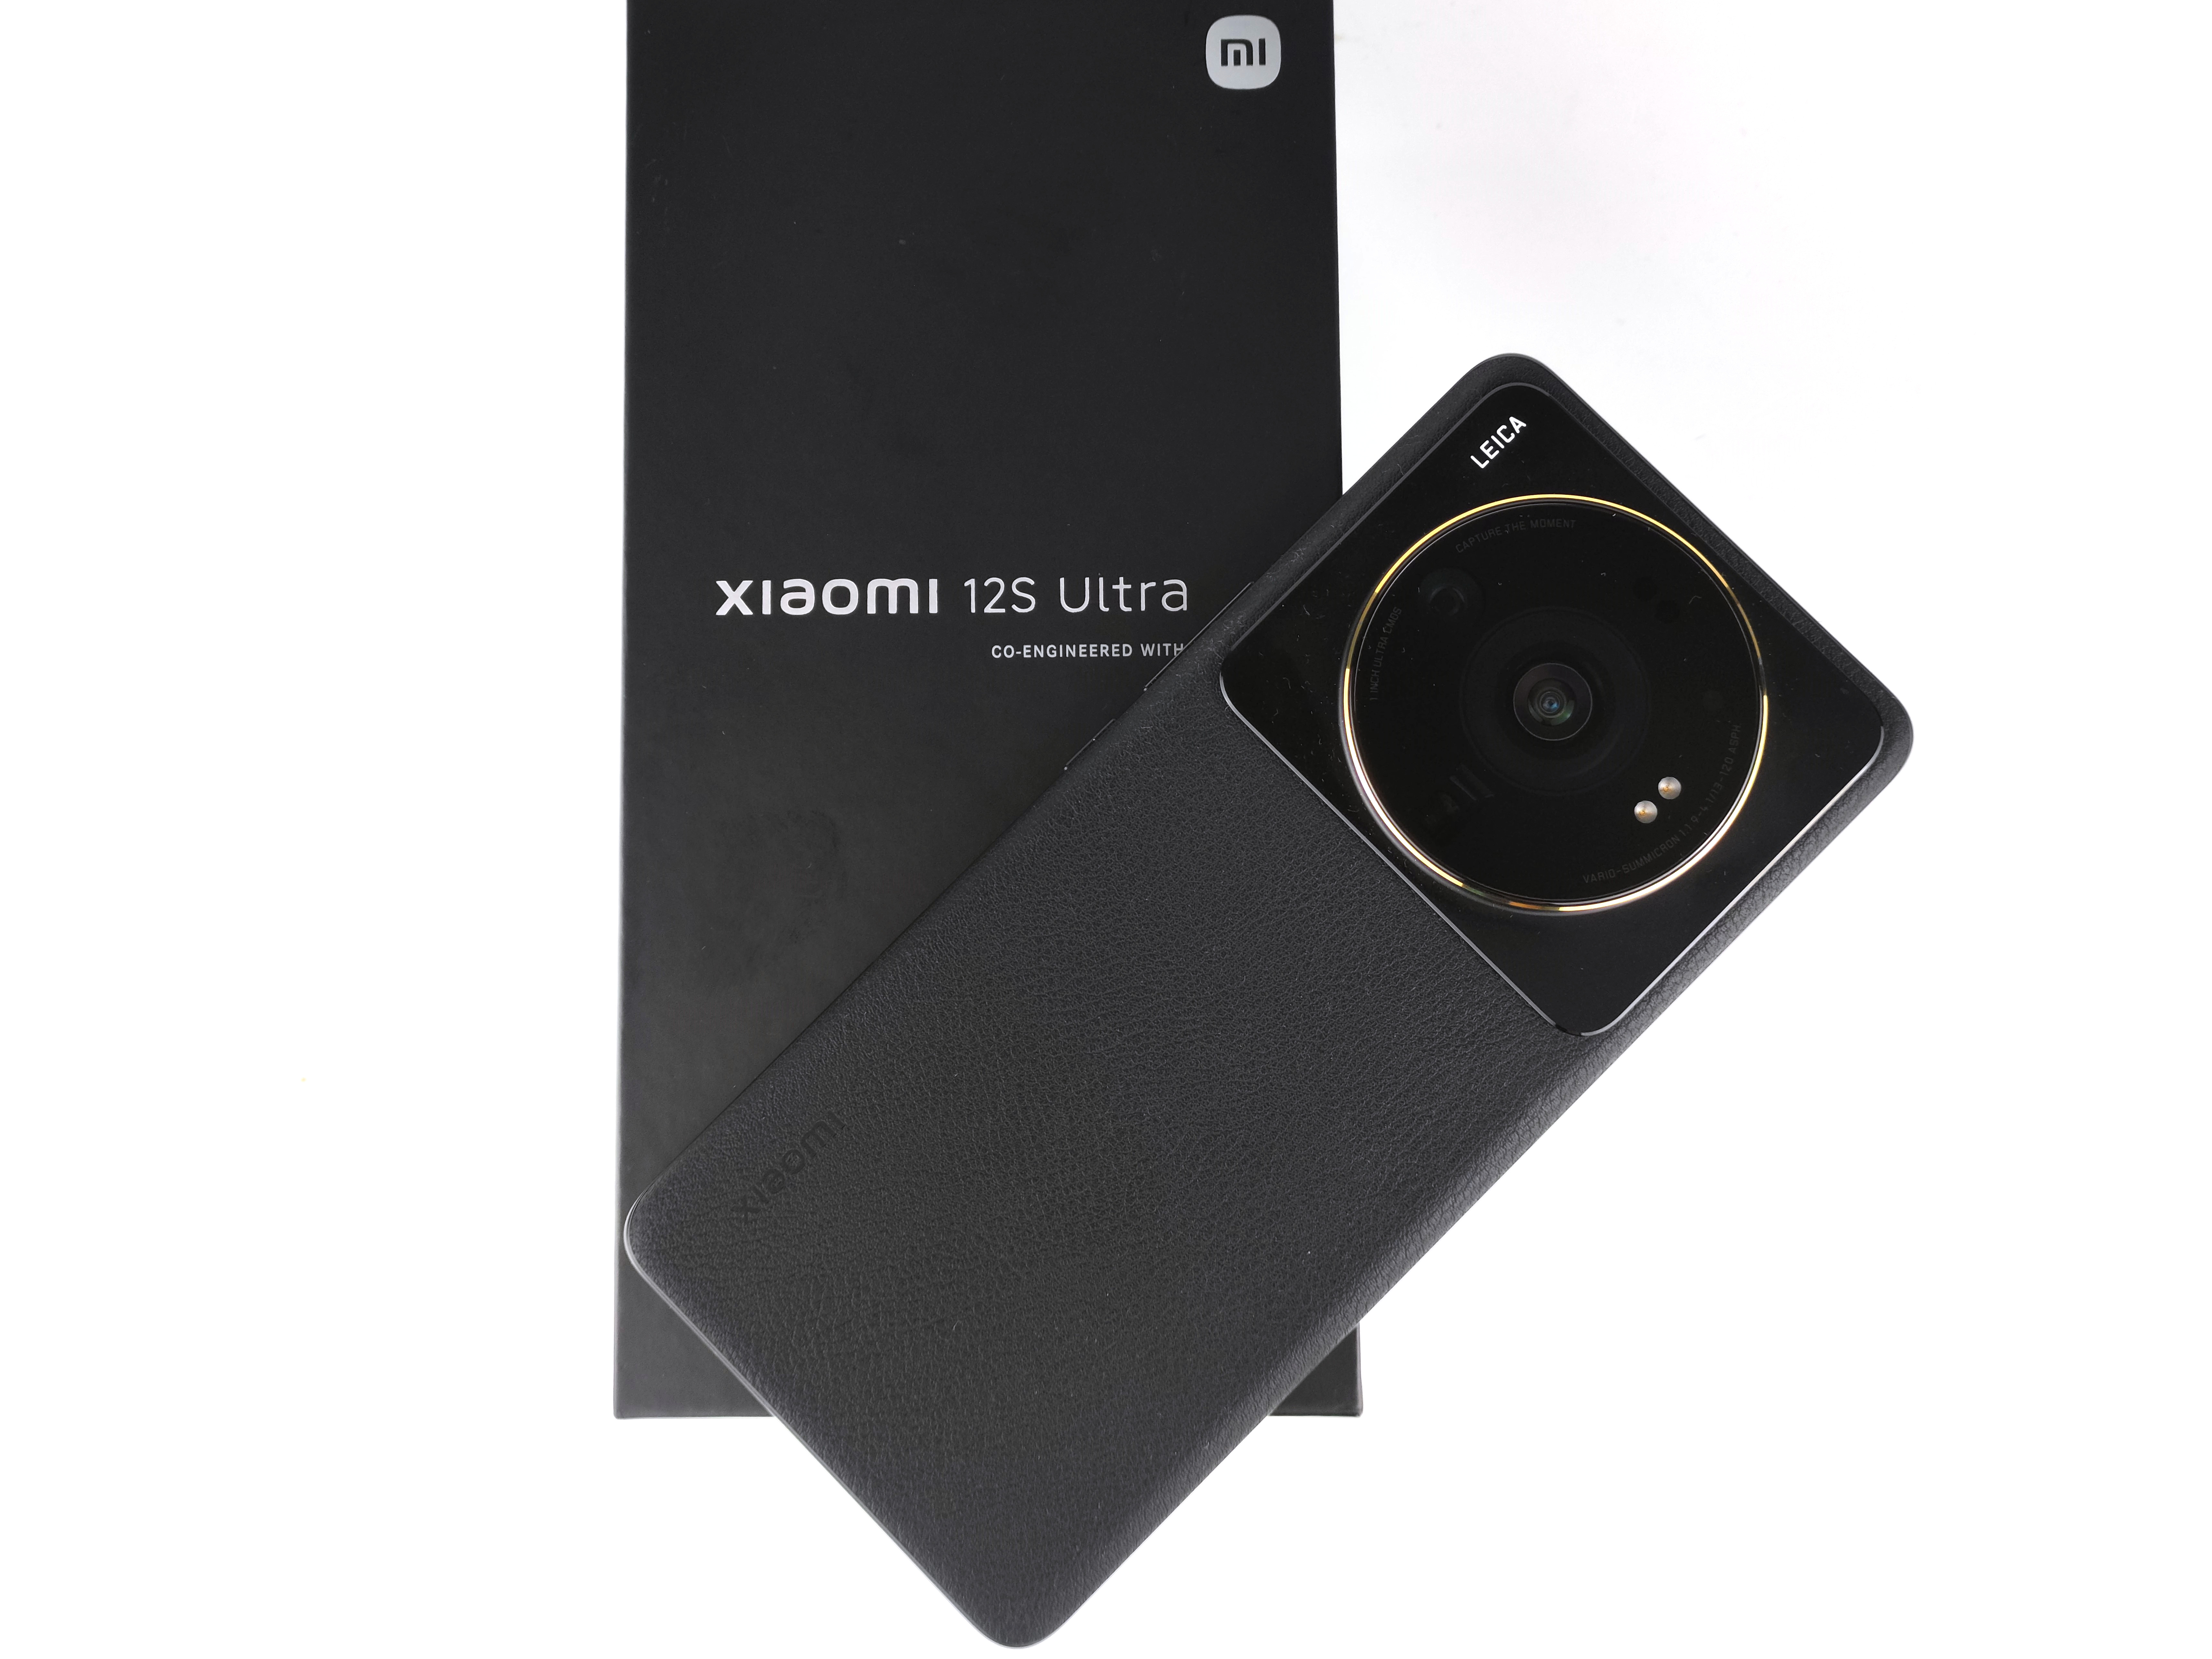 Xiaomi 12S, 12S Pro, 12S Ultra global launch seems unlikely, may remain  China exclusive - Gizmochina